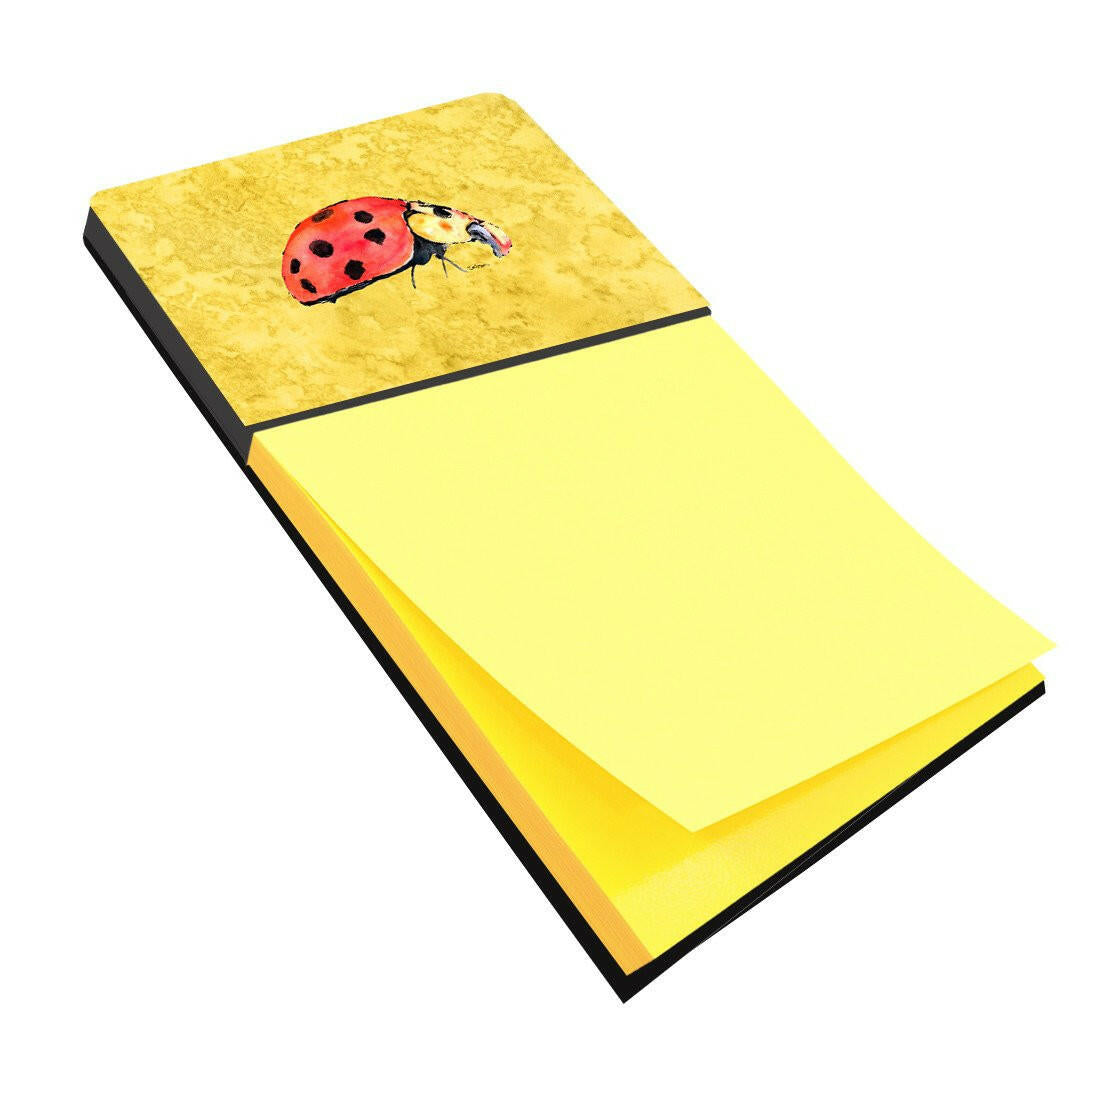 Lady Bug on Yellow Refiillable Sticky Note Holder or Postit Note Dispenser 8867SN by Caroline's Treasures